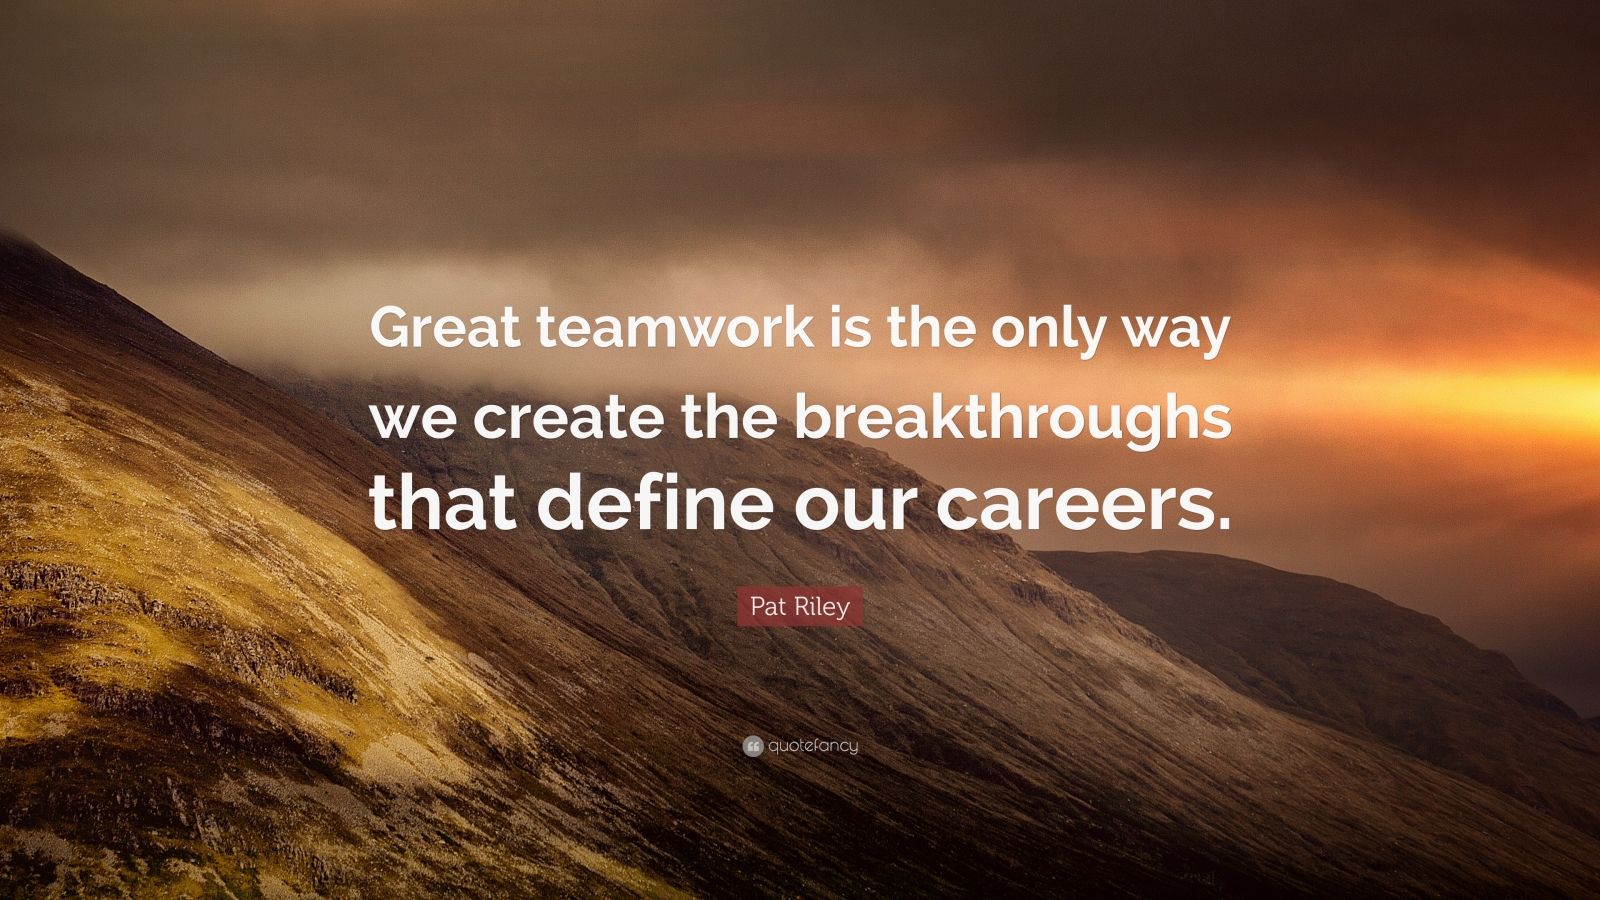 Pat Riley Quote: “Great teamwork is the only way we create the ...